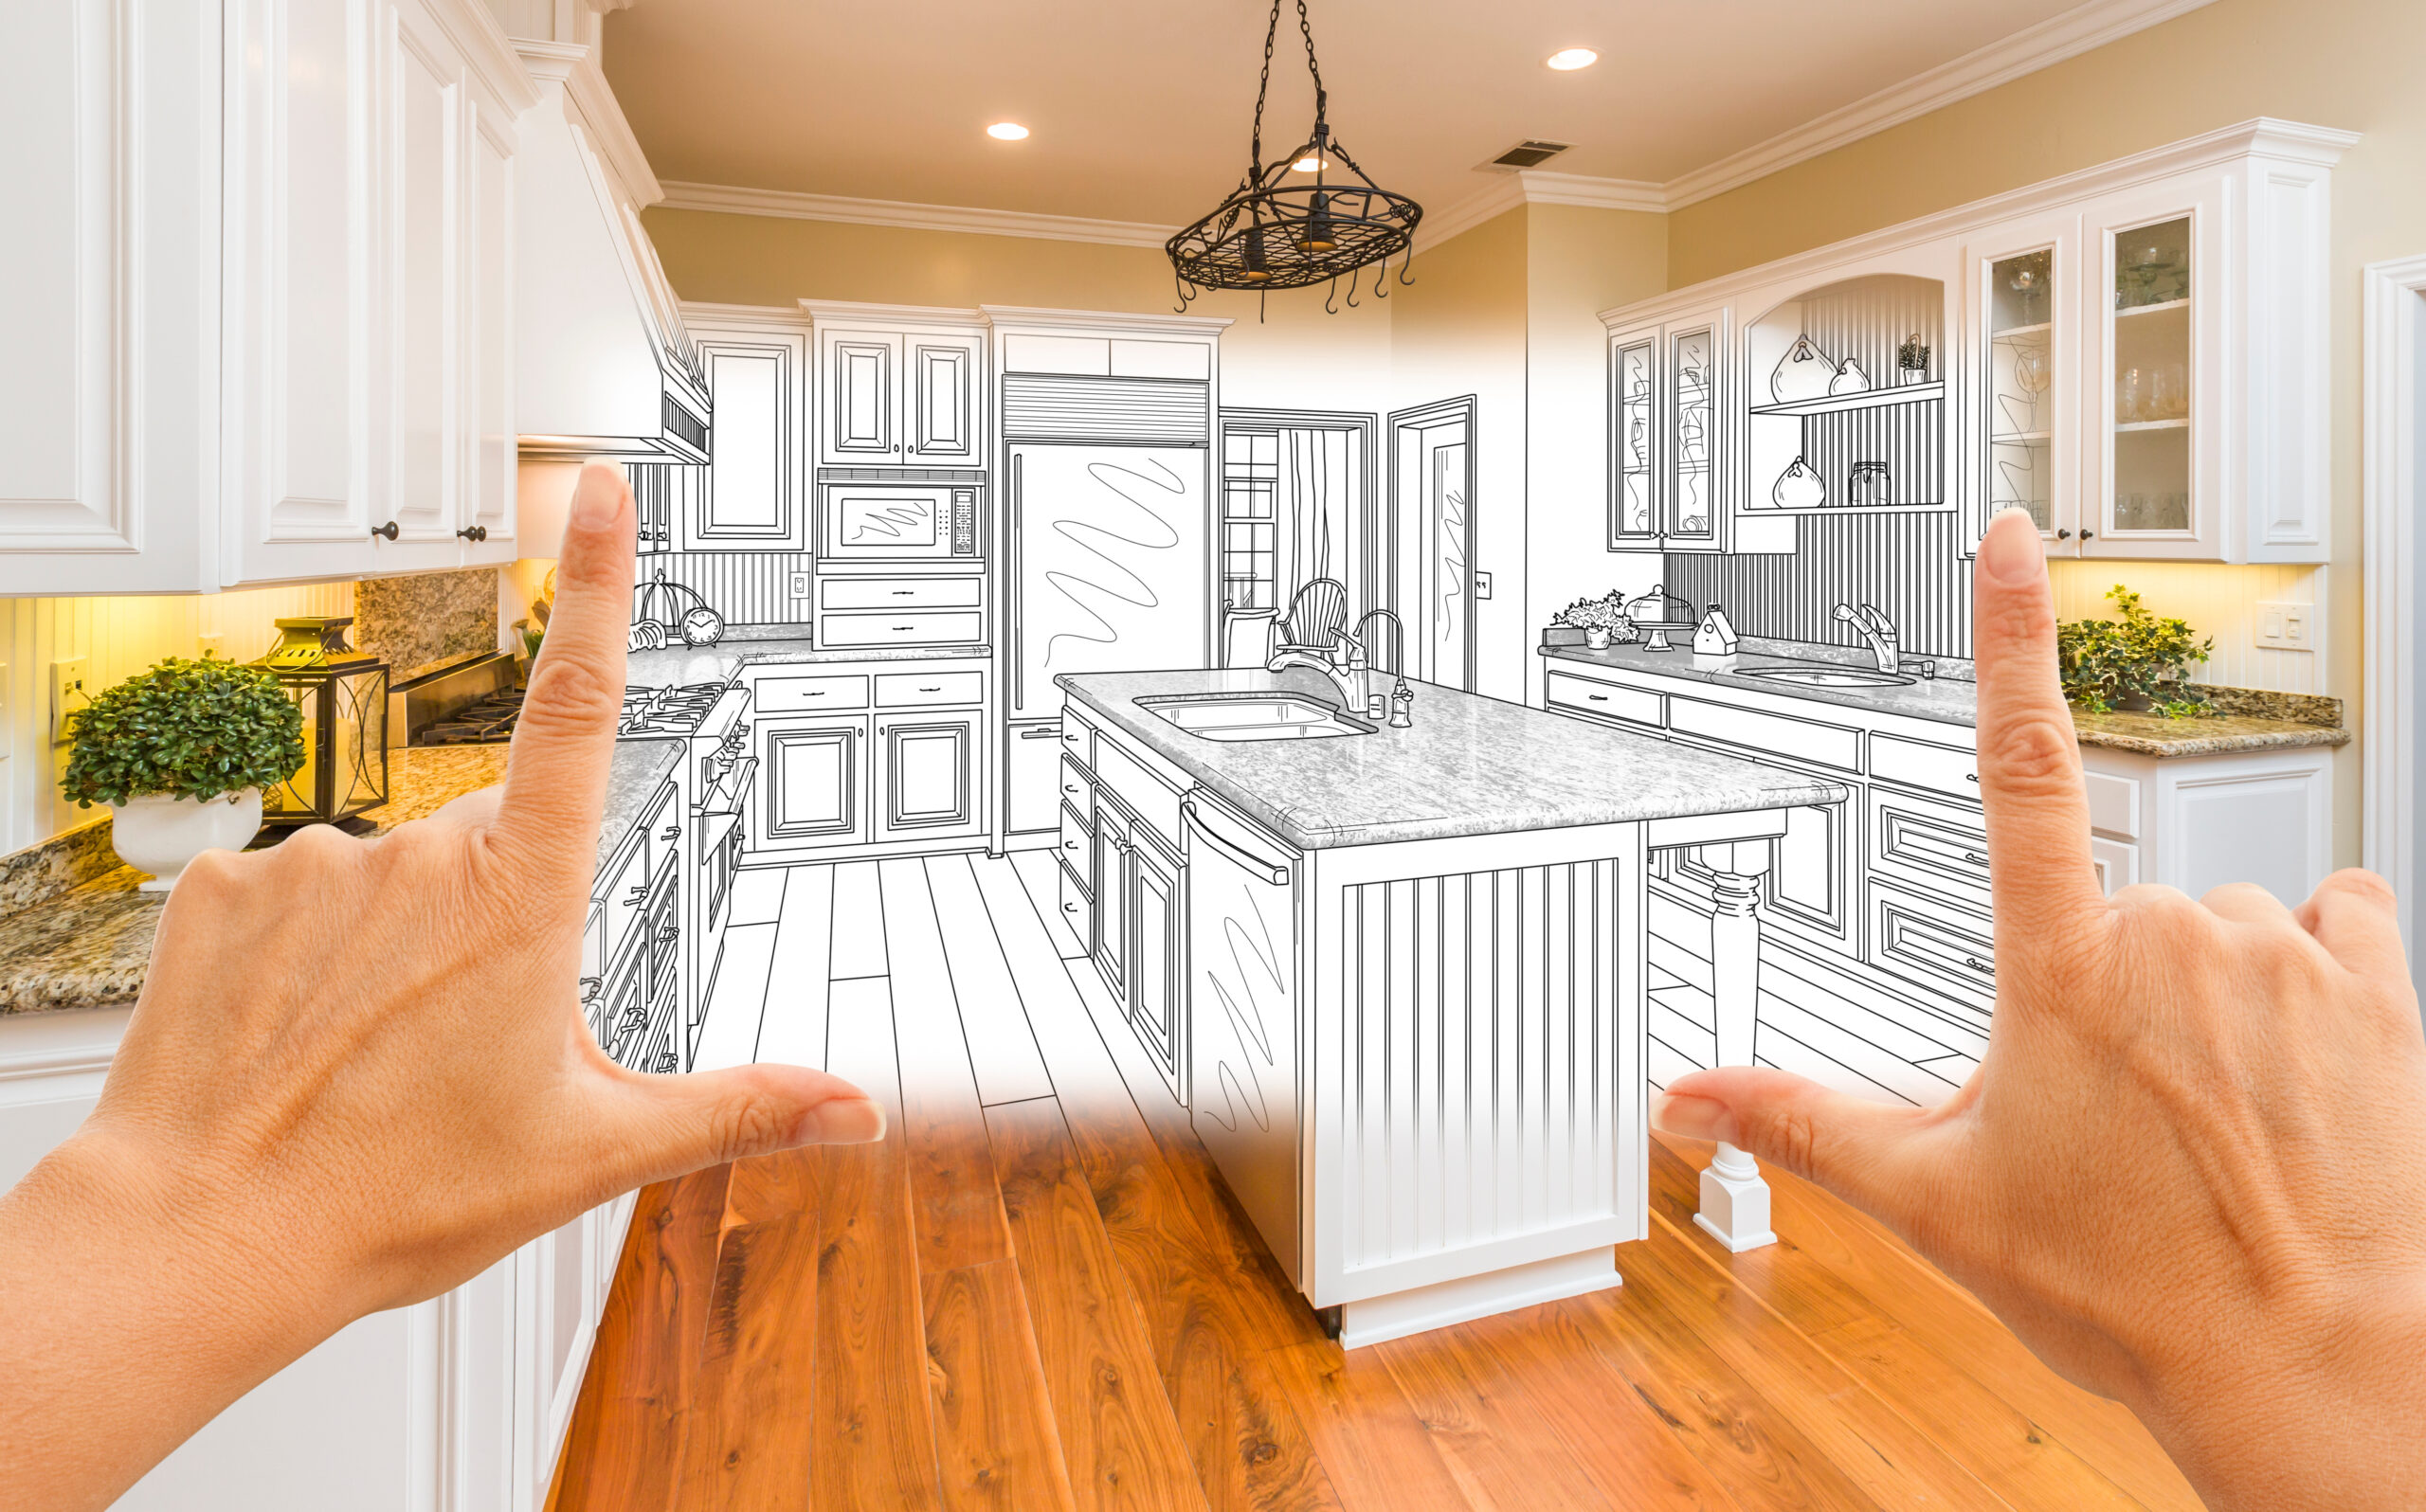 Female Hands Framing Custom Kitchen Design Drawing and Square Photo Combination.